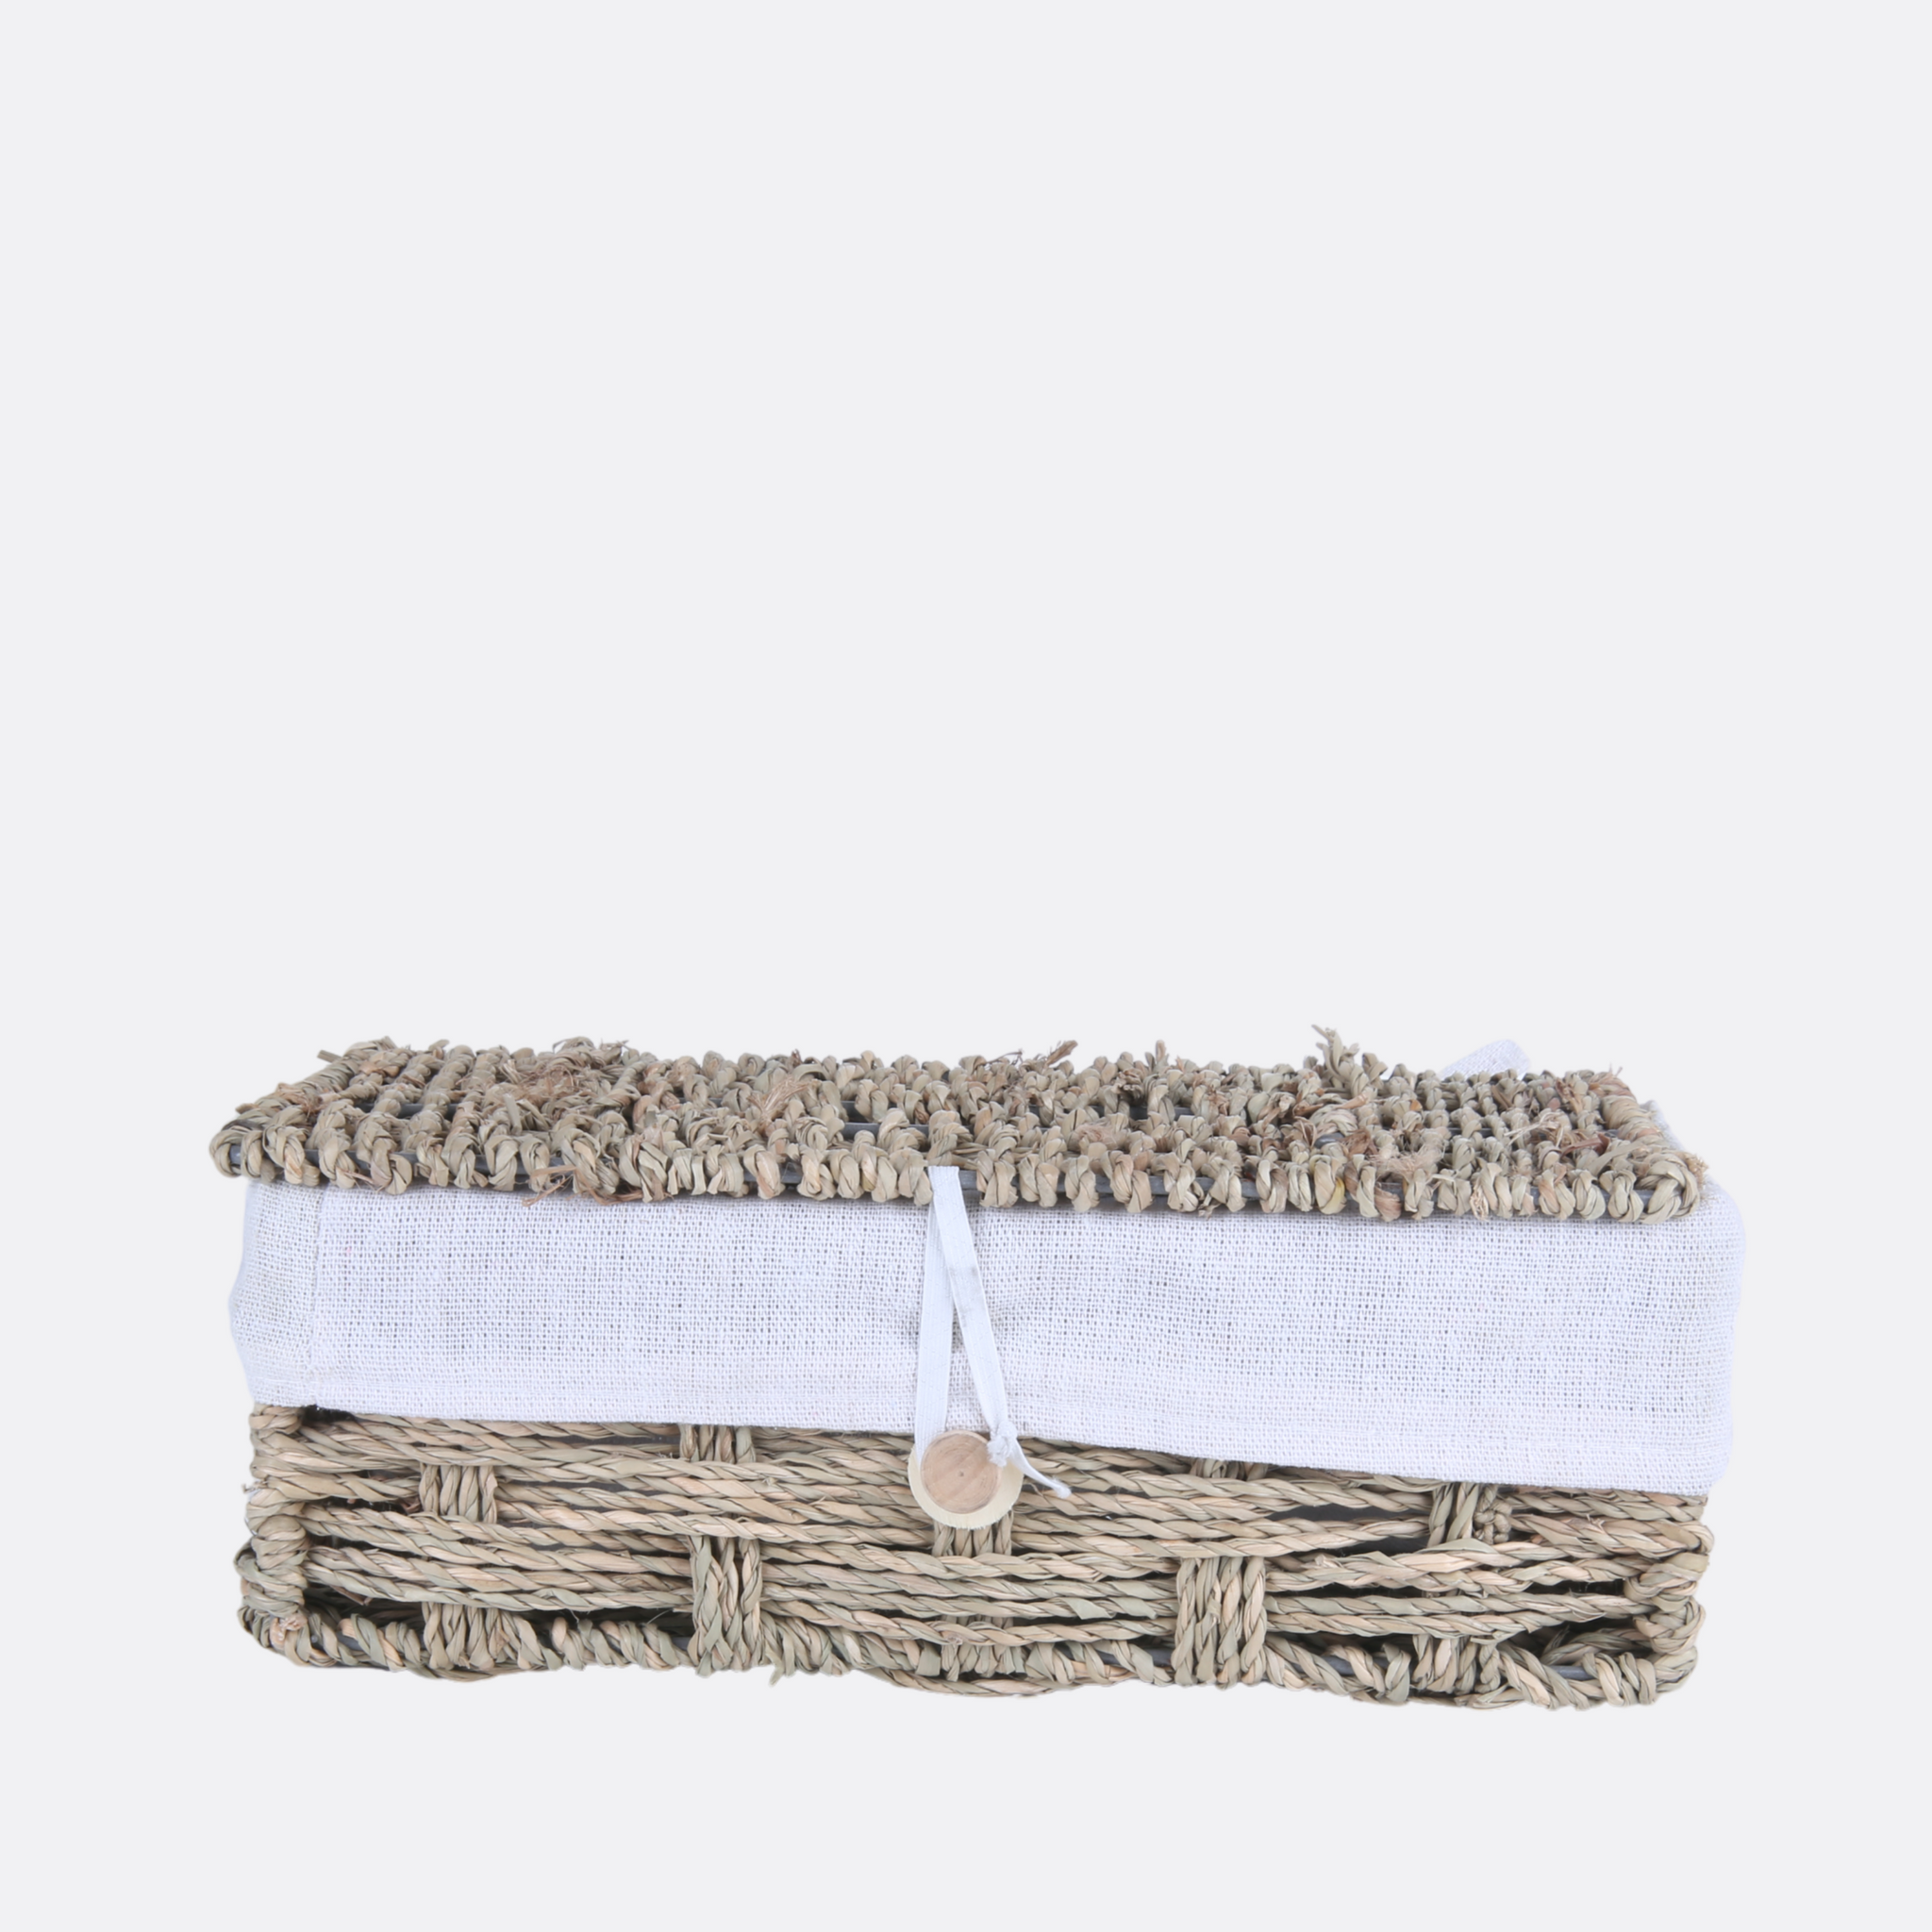 Jute Fabric lined basket with tissue box